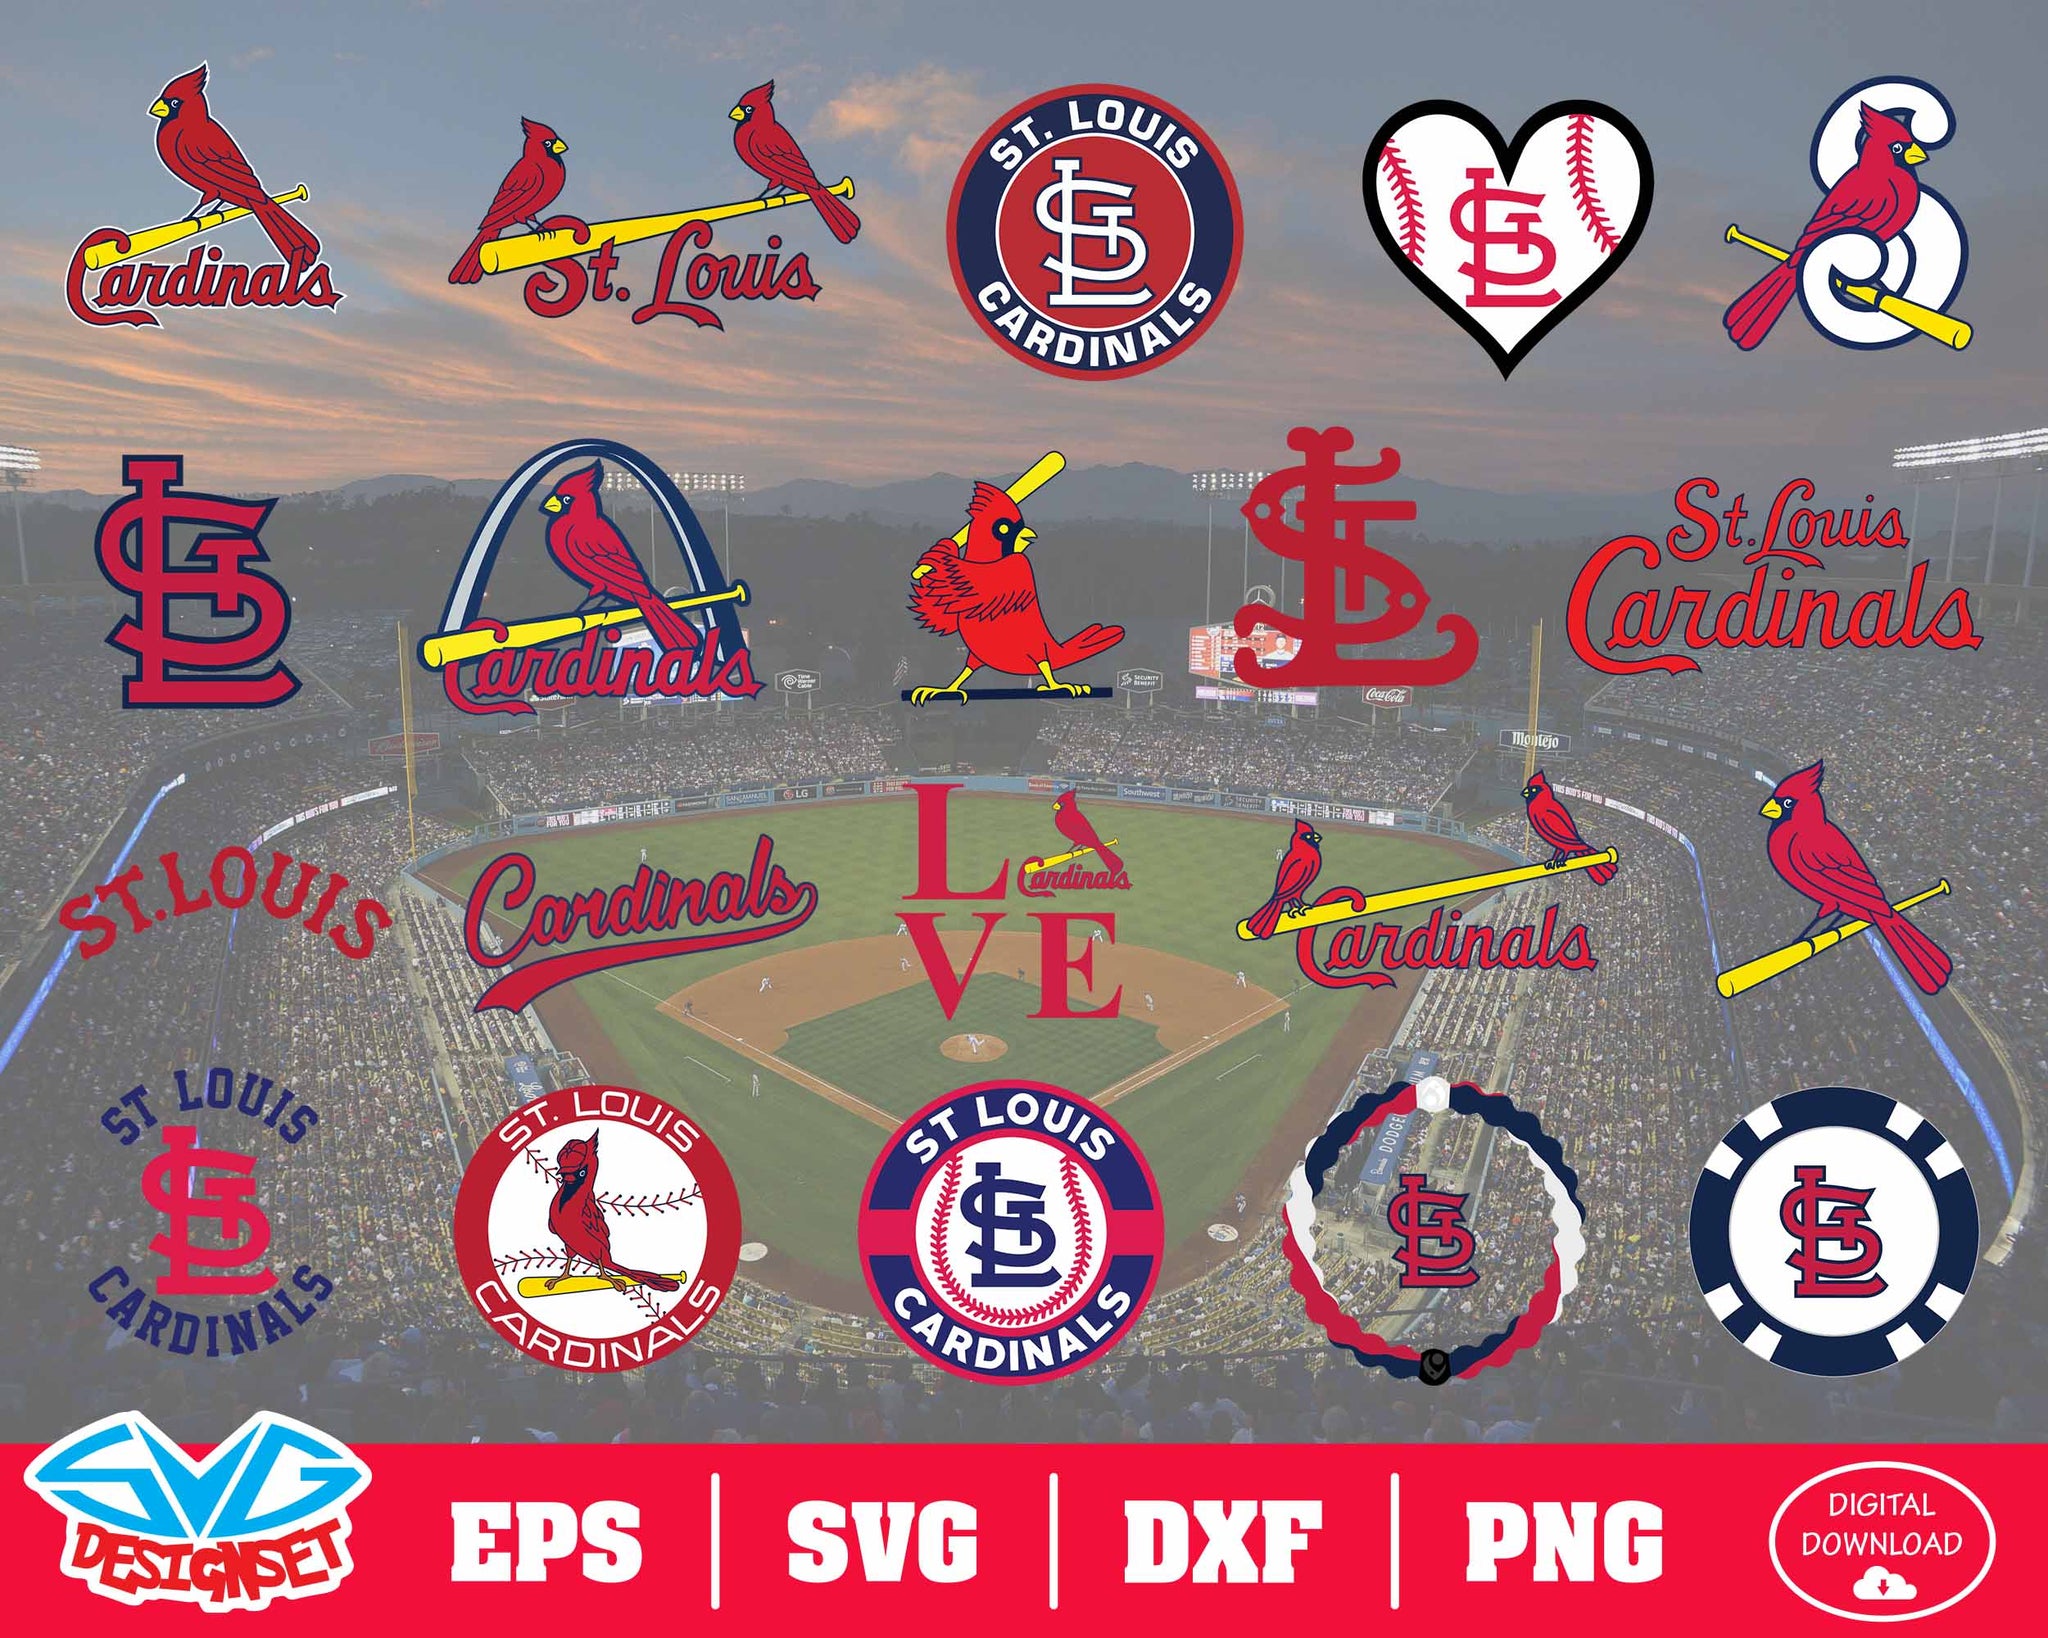 St. Louis Cardinals Team Svg, Dxf, Eps, Png, Clipart, Silhouette and Cutfiles - SVGDesignSets